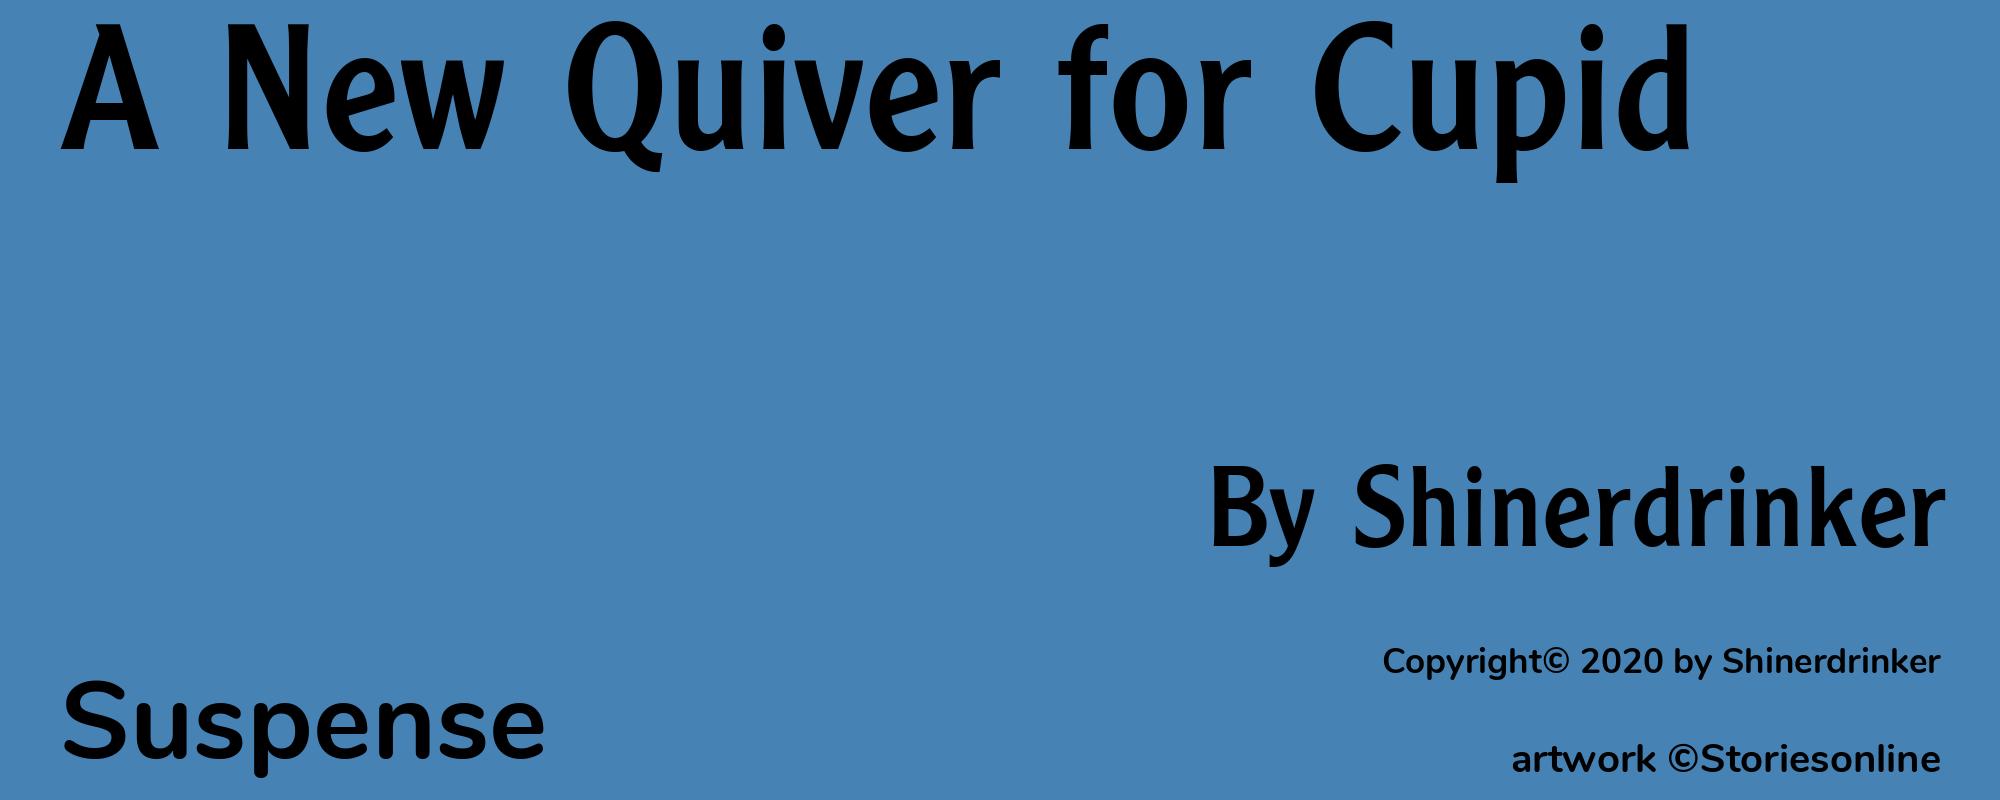 A New Quiver for Cupid - Cover